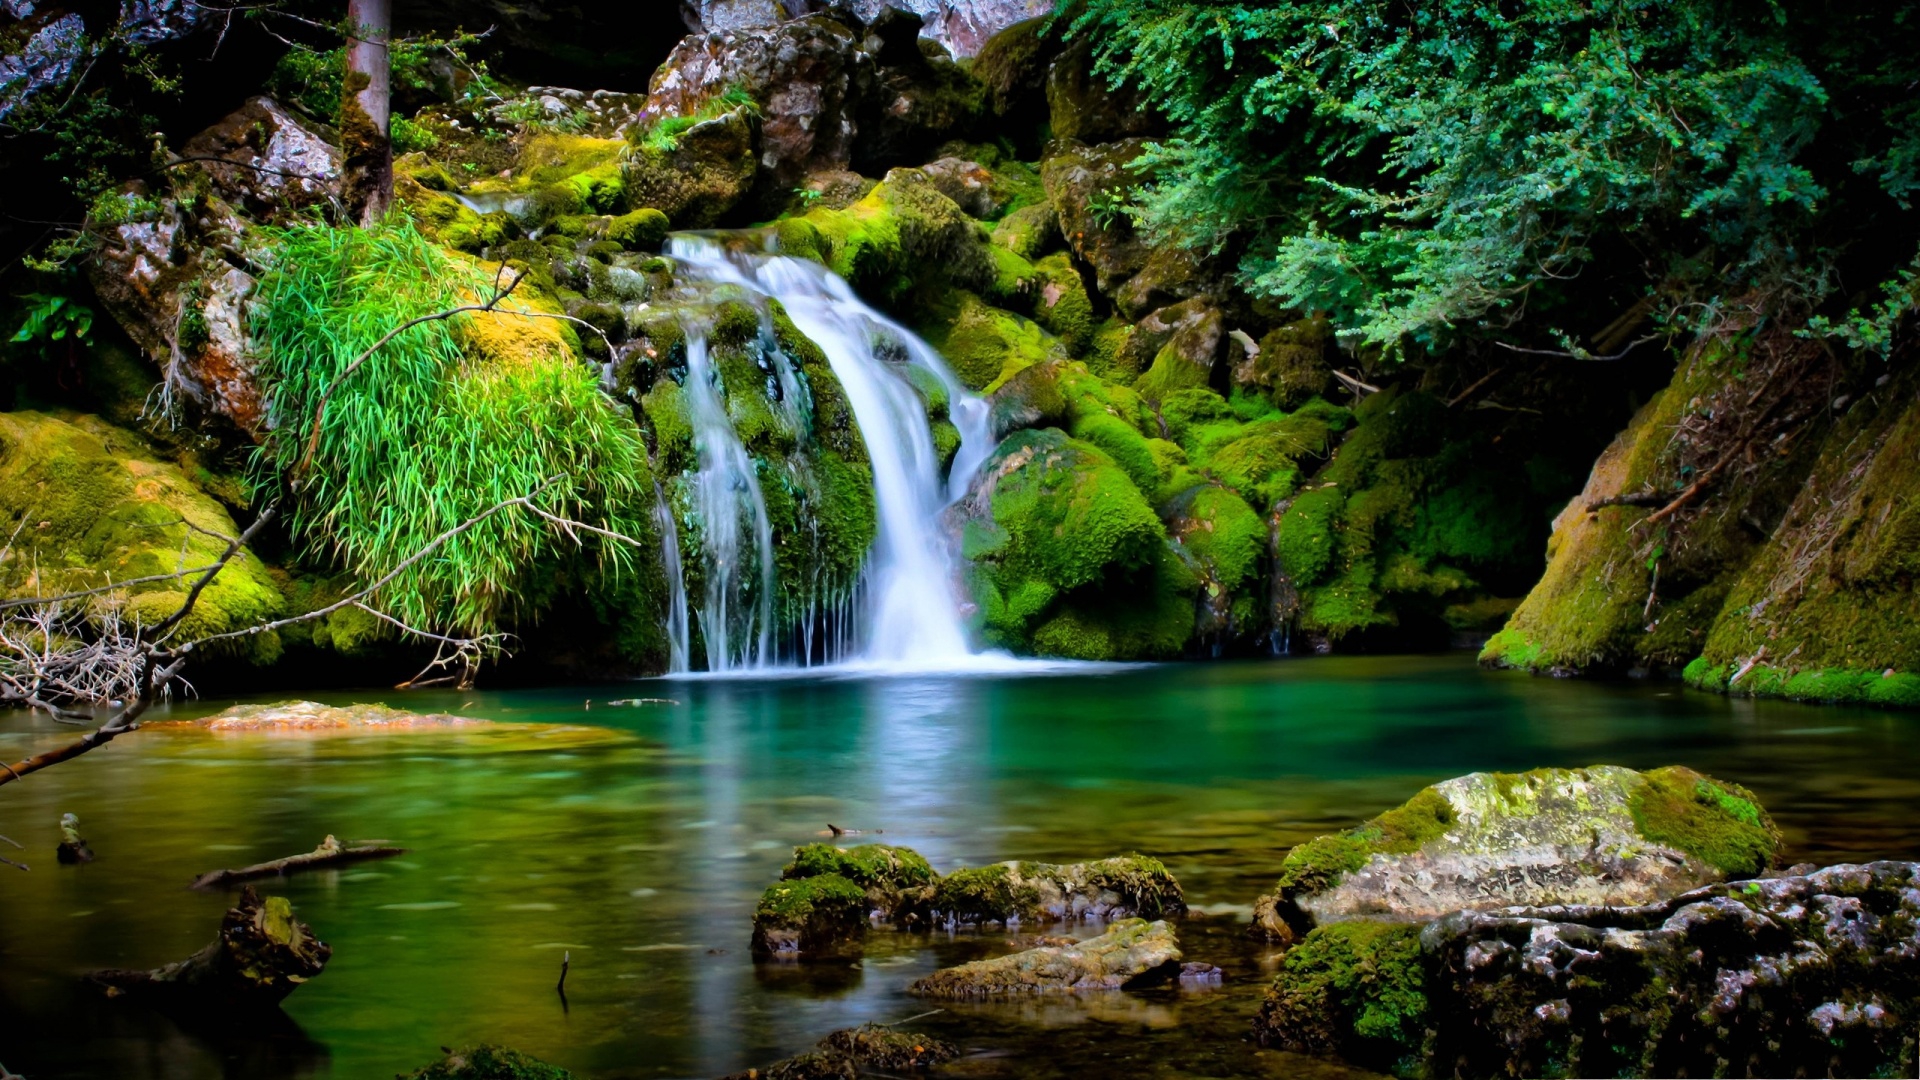 2013 Top 10 Most Beautiful Scenery Images Wallpaper 1920x1080